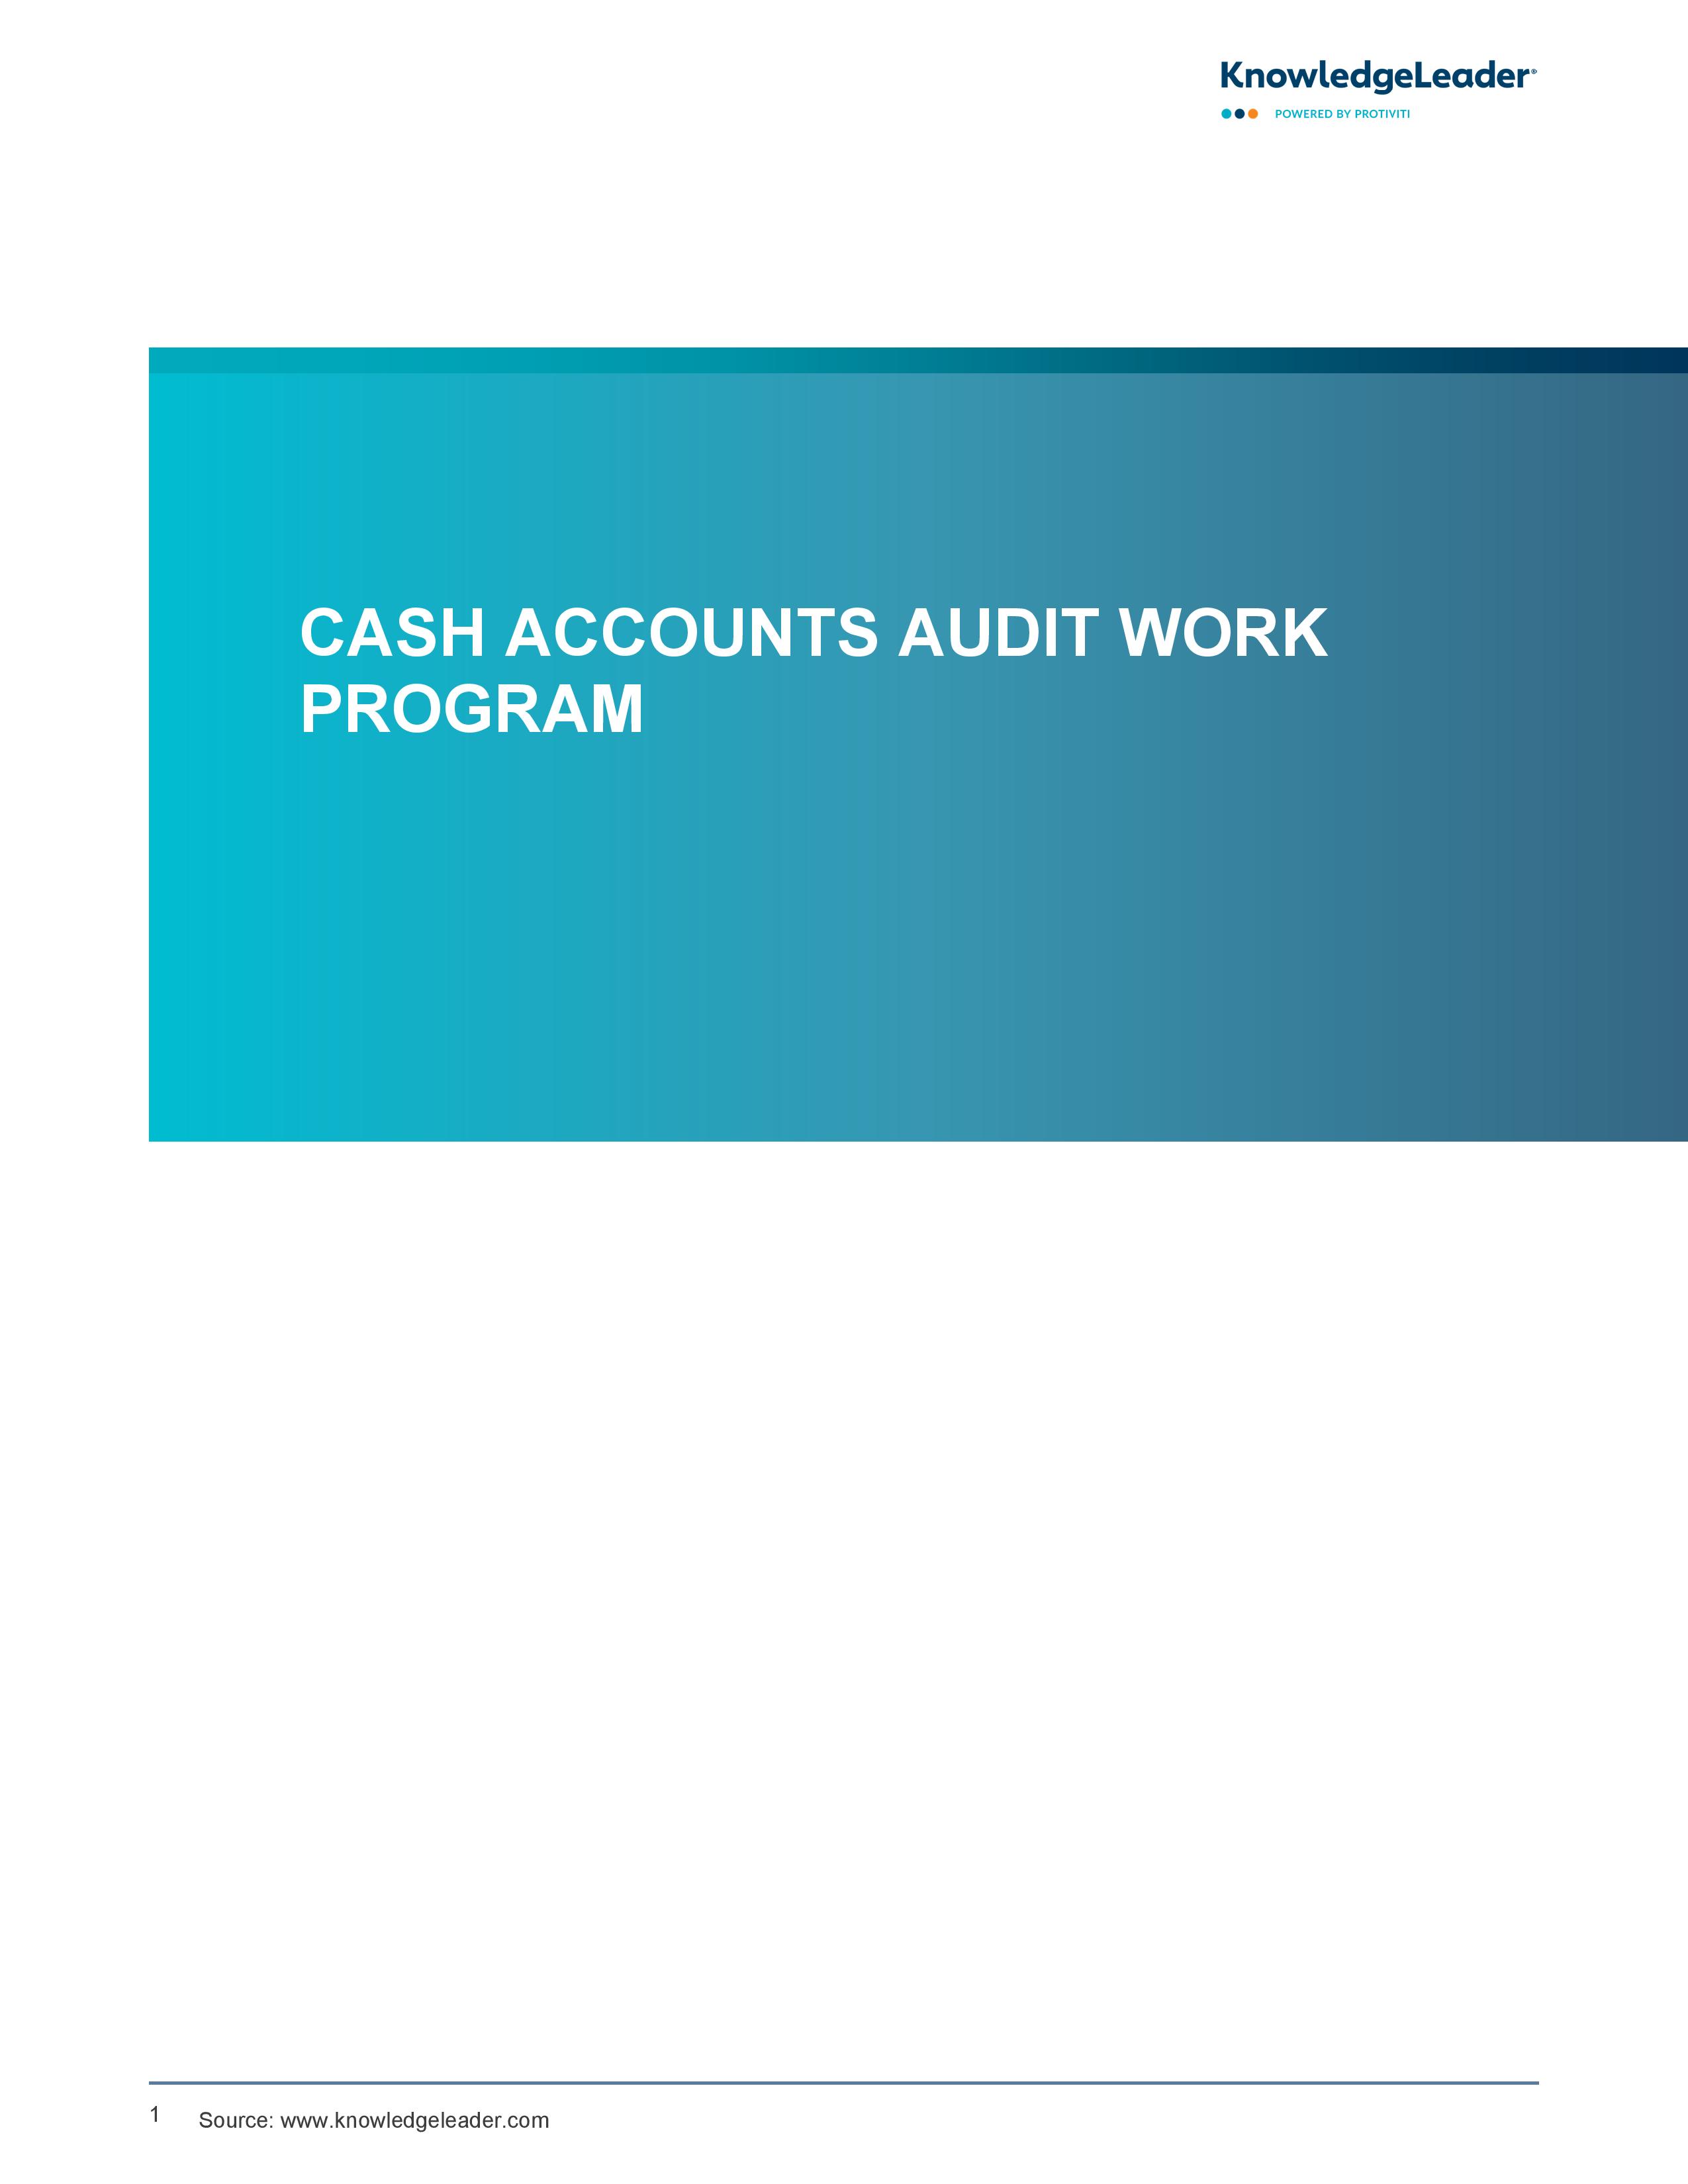 Screenshot of the first page of Cash Accounts Audit Work Program